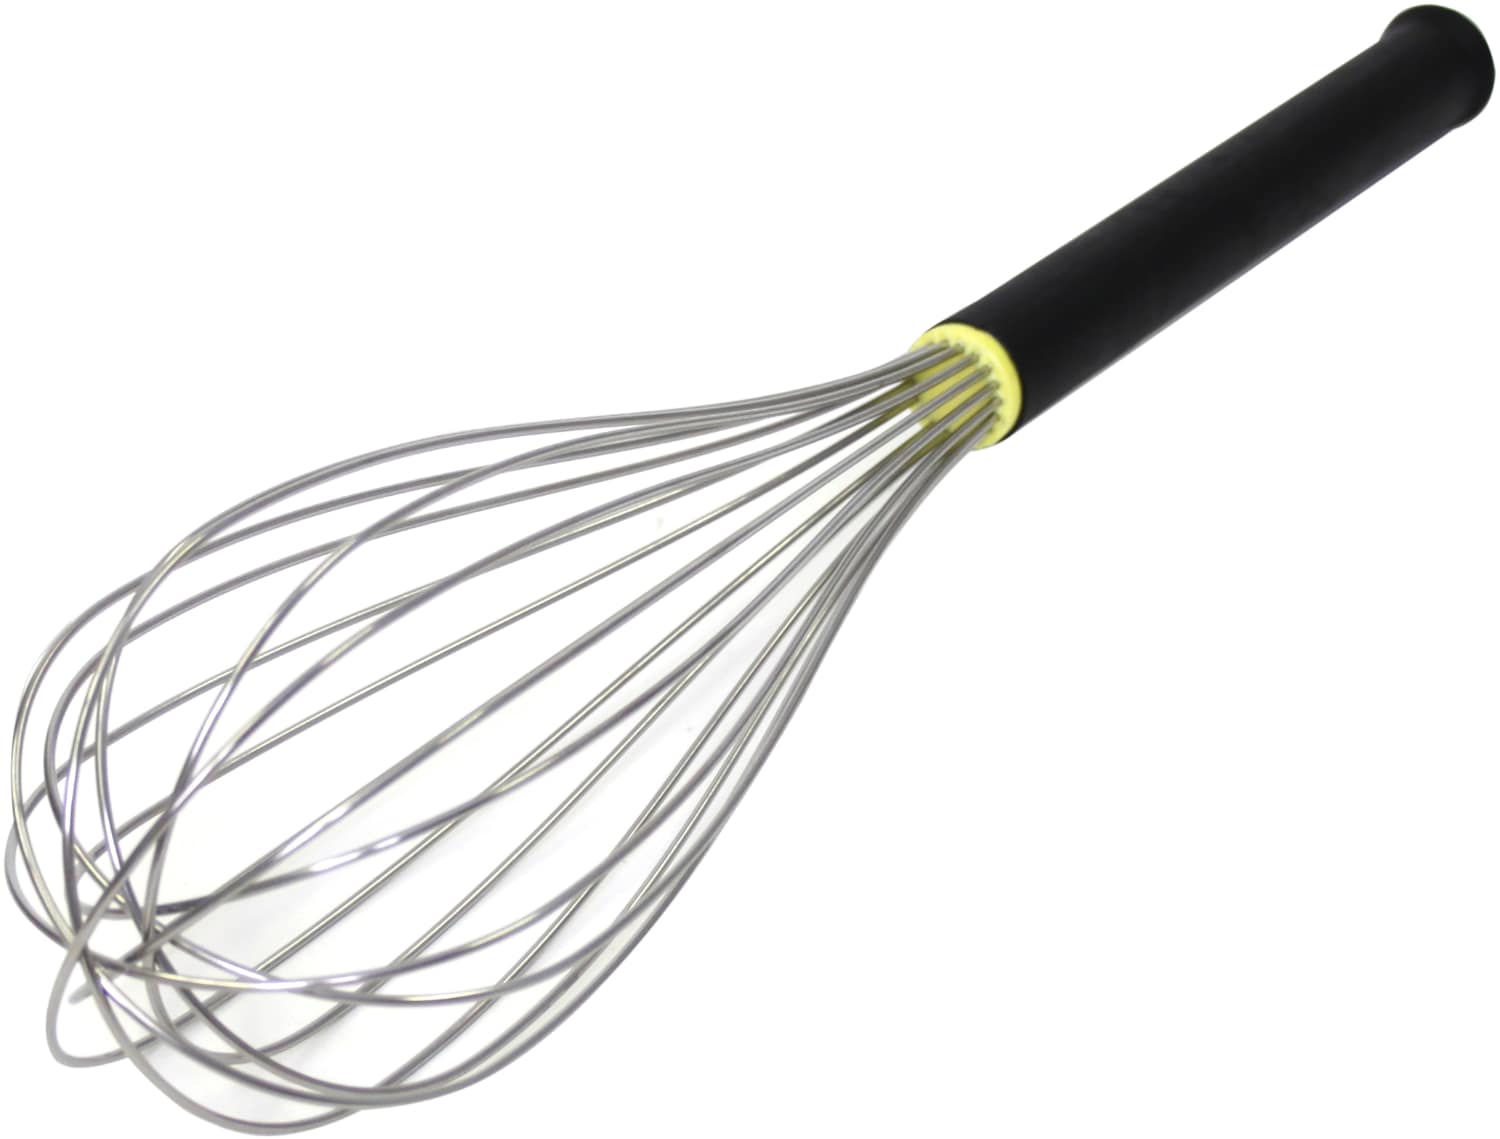 Whisk handle made of "Exoglass"